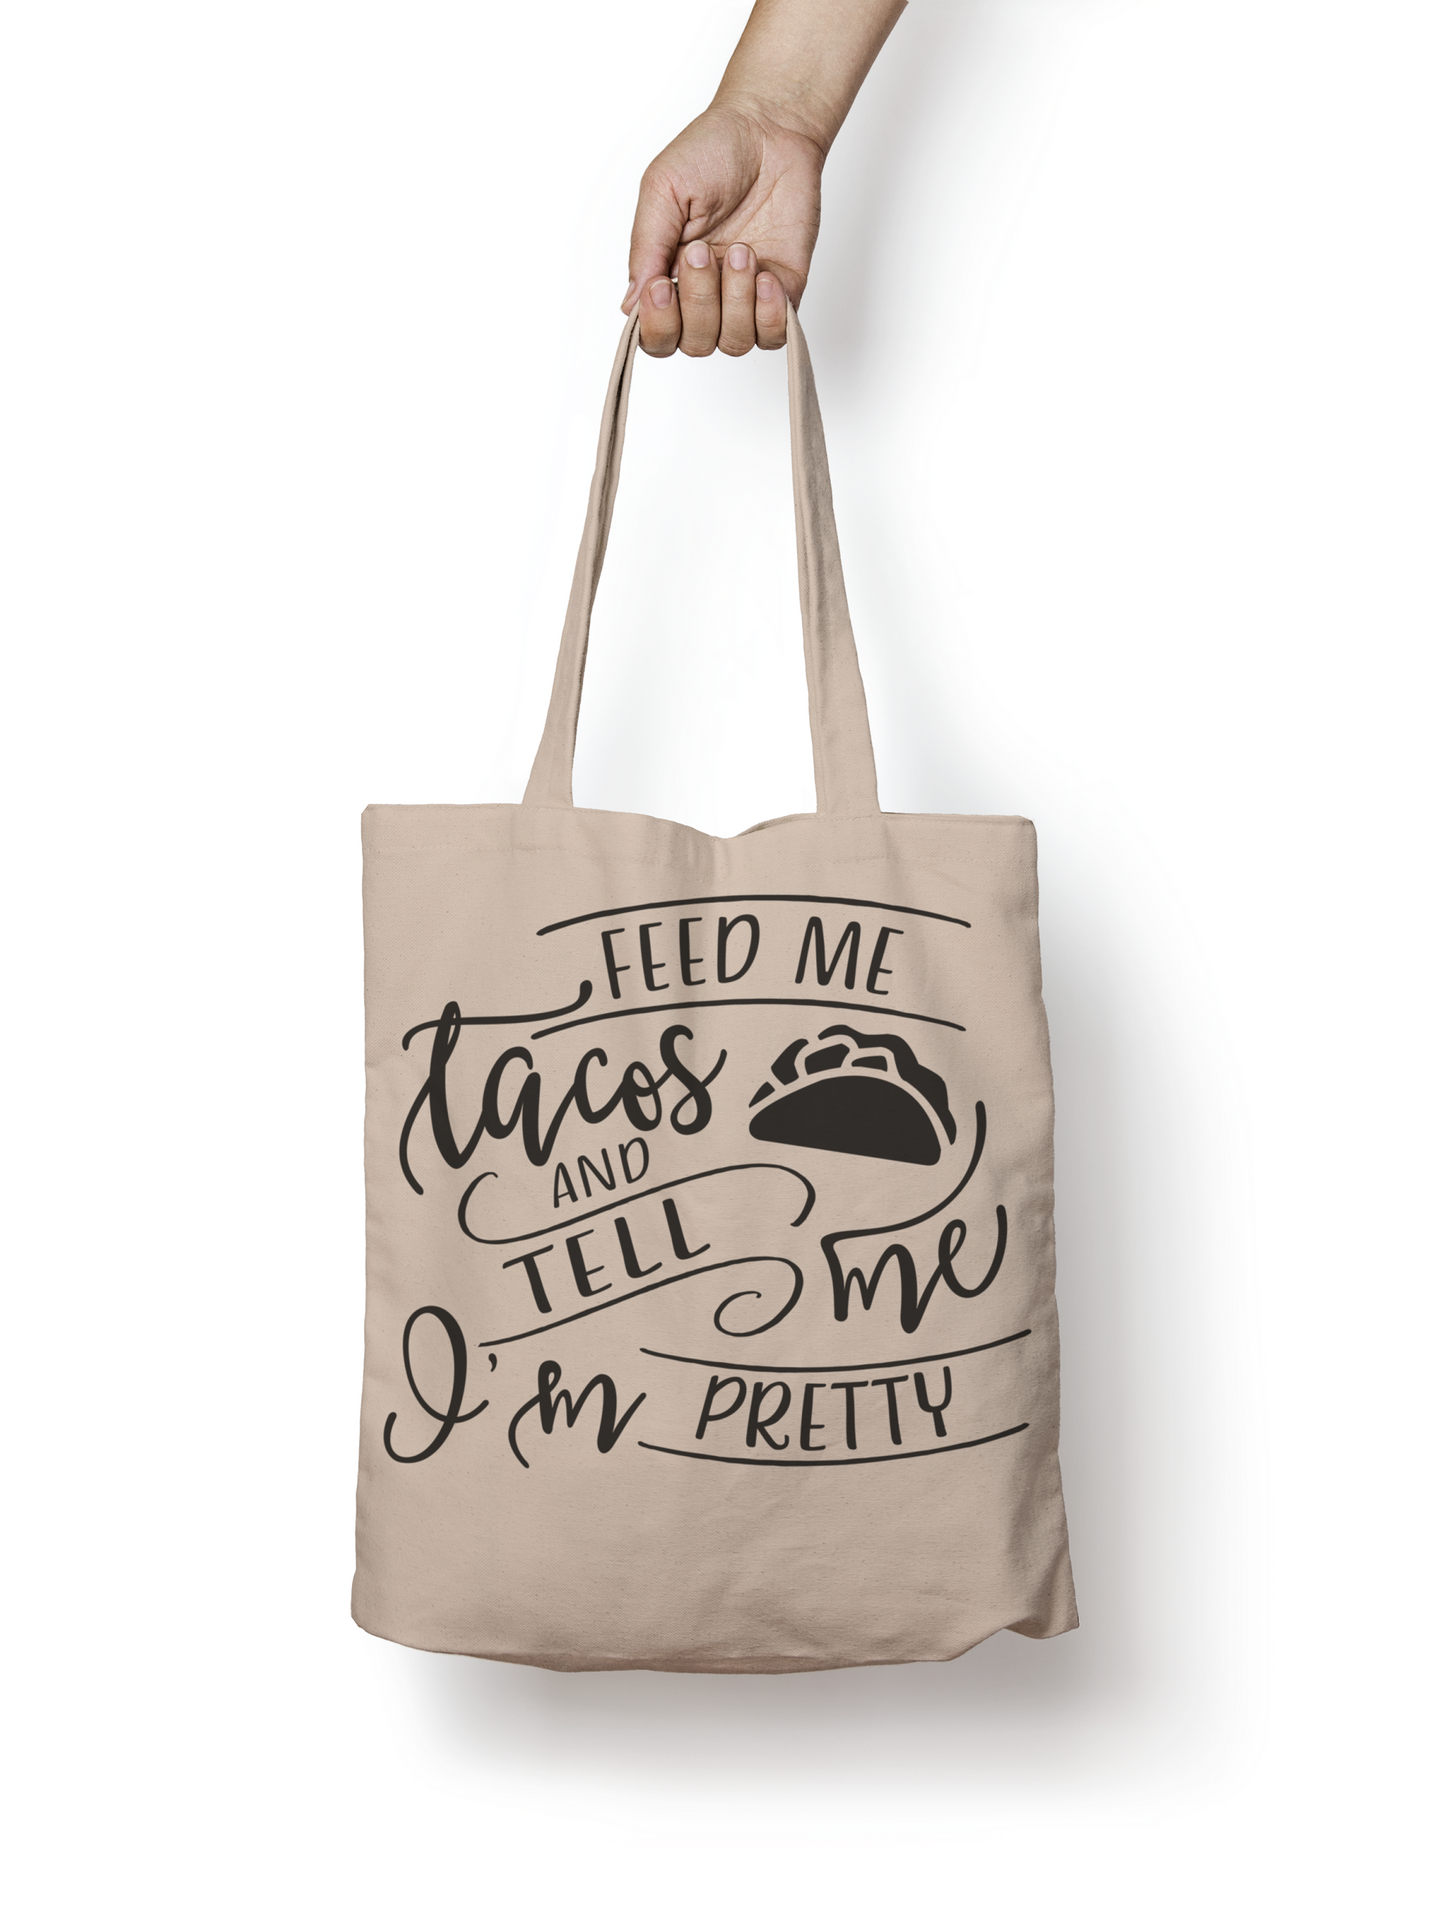 Feed Me Tacos Tote, Grocery Tote, Book Tote, Office Tote, 100% Cotton Fun Tote